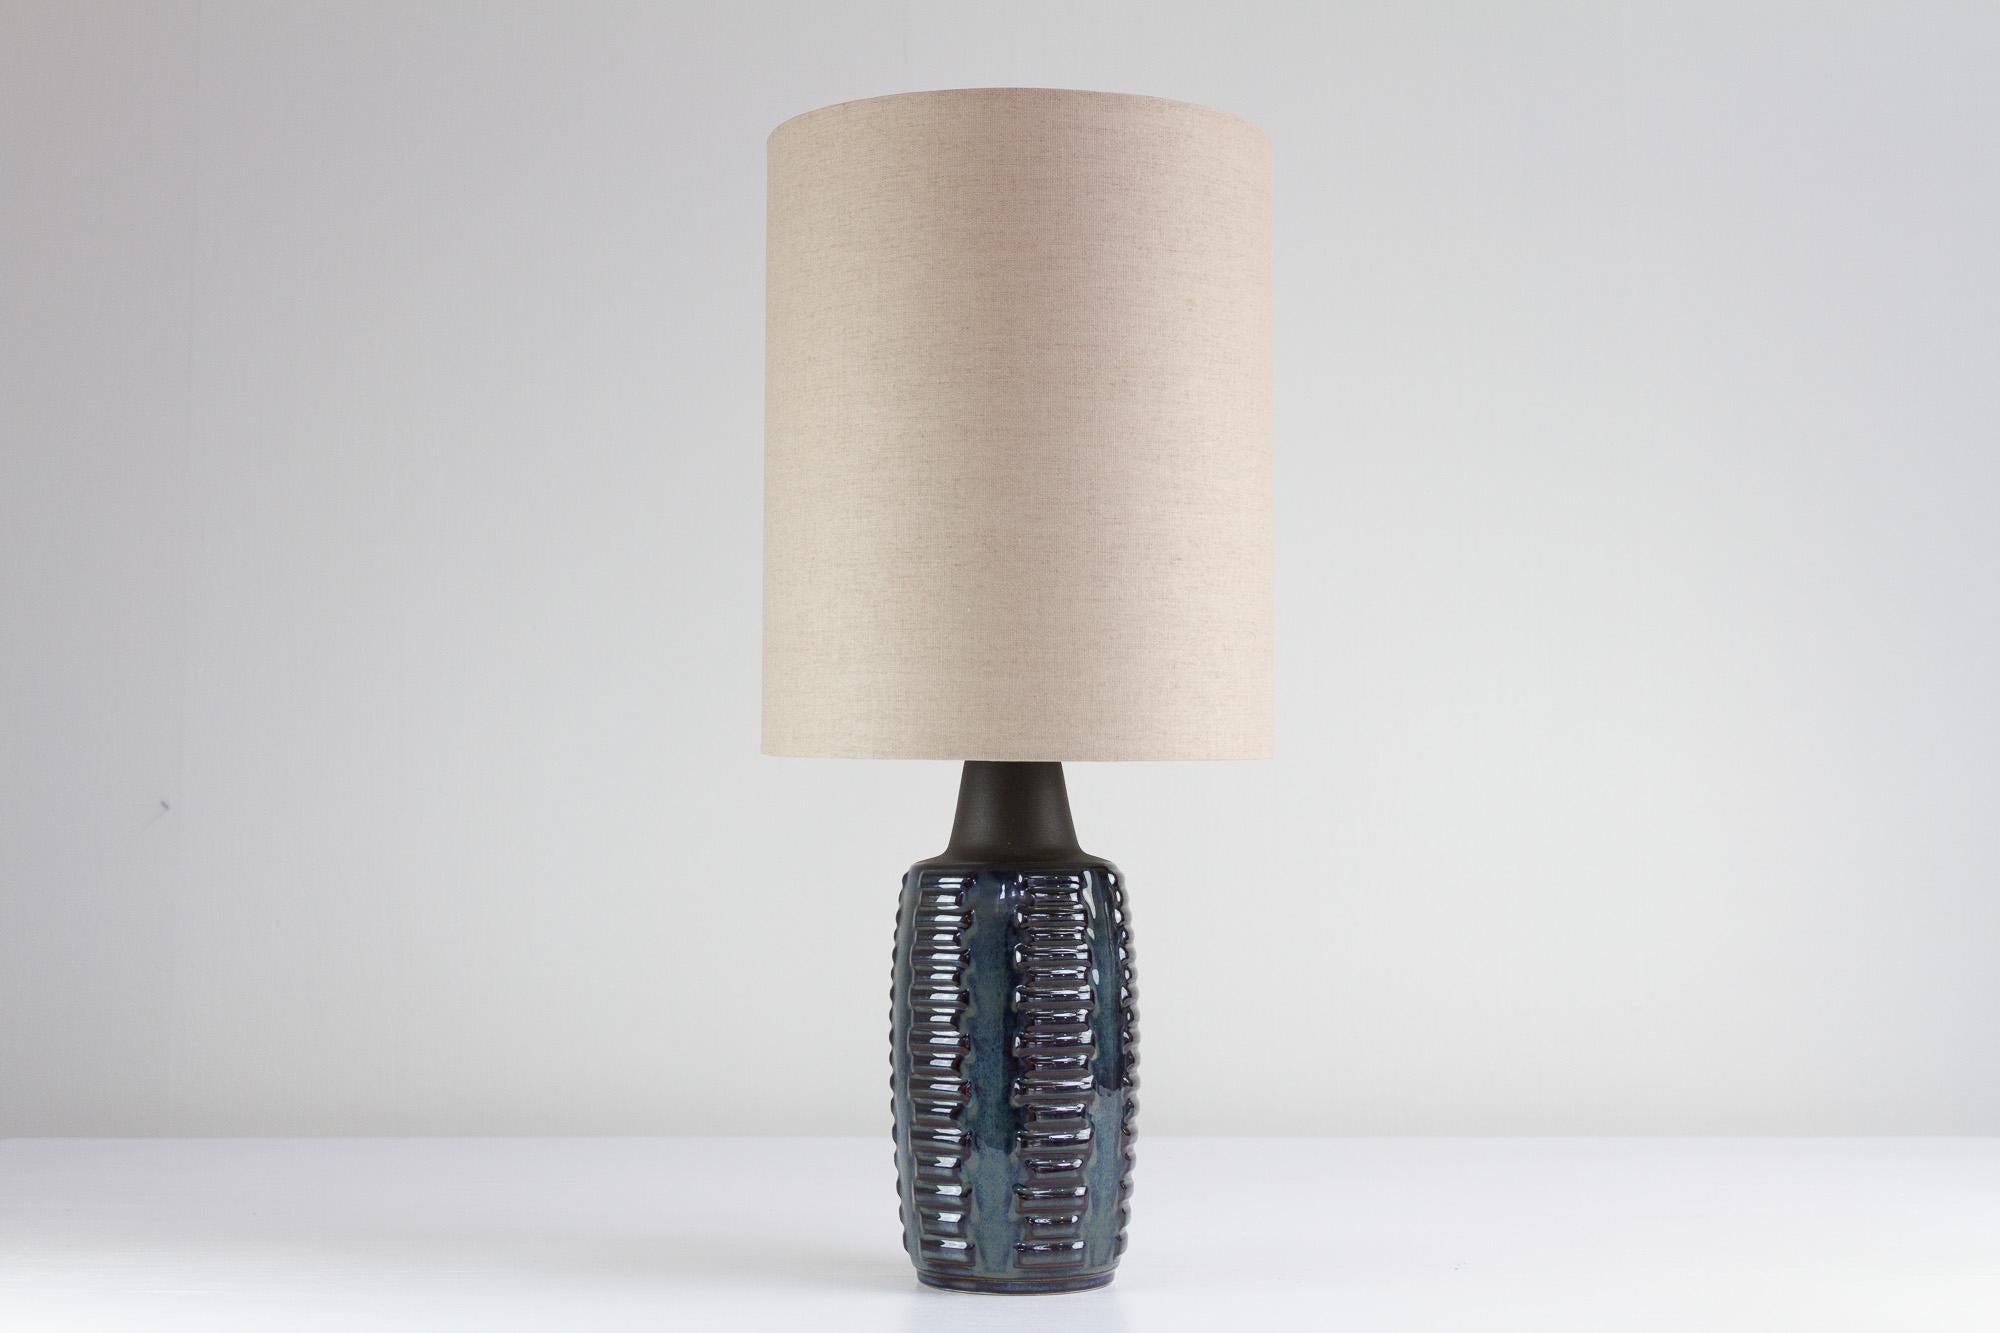 Danish modern ceramic table lamp by Einar Johansen for Søholm, 1960s.
Mid-Century Modern Danish blue ceramic table lamp designed by Einar Johansen, made by Søholm, Denmark. Soholm is a Danish pottery on the island of Bornholm founded in 1835.